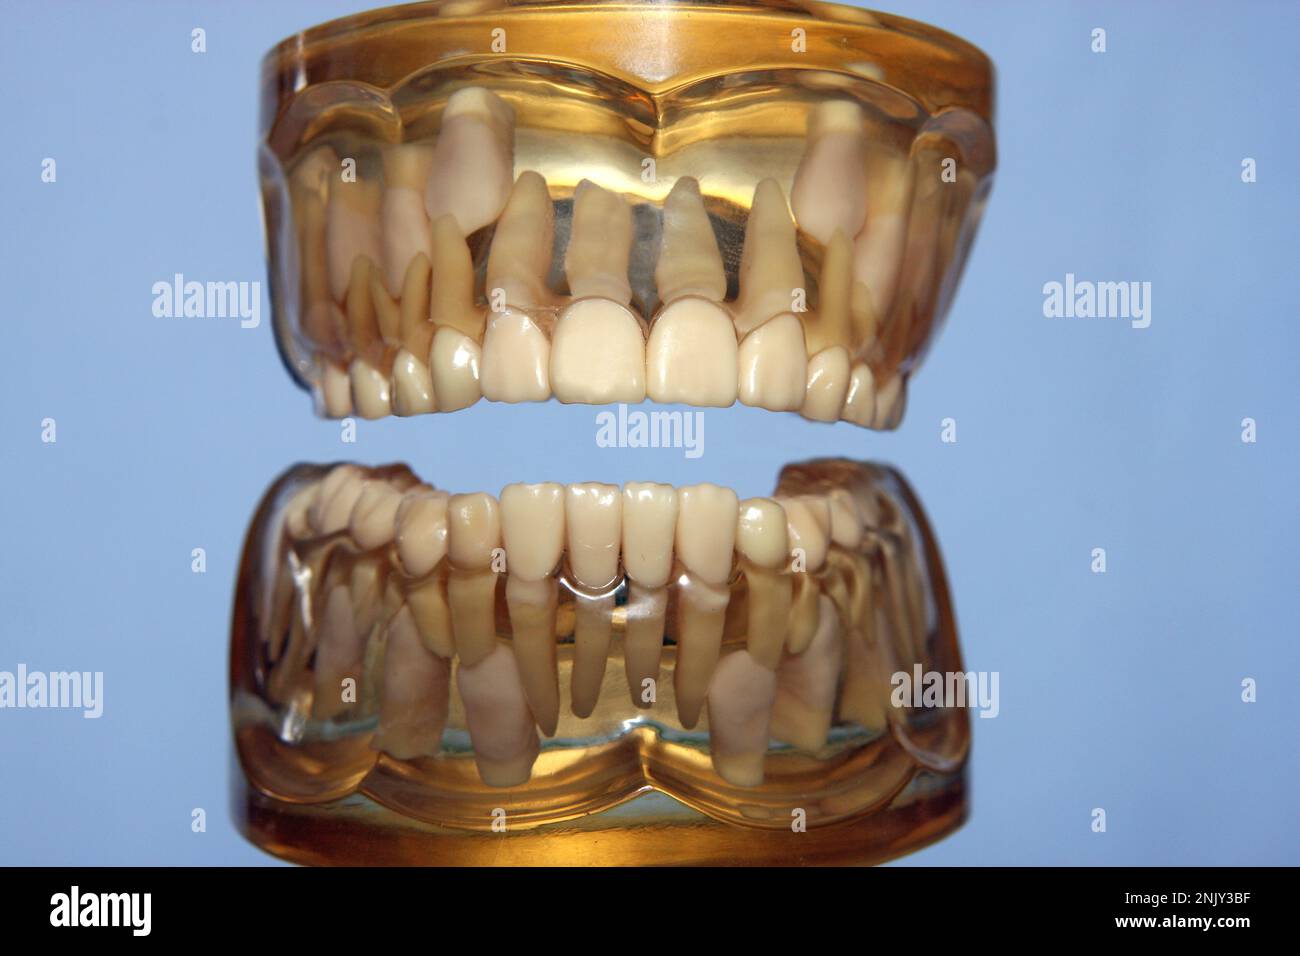 transparent model of a set of teeth Stock Photo